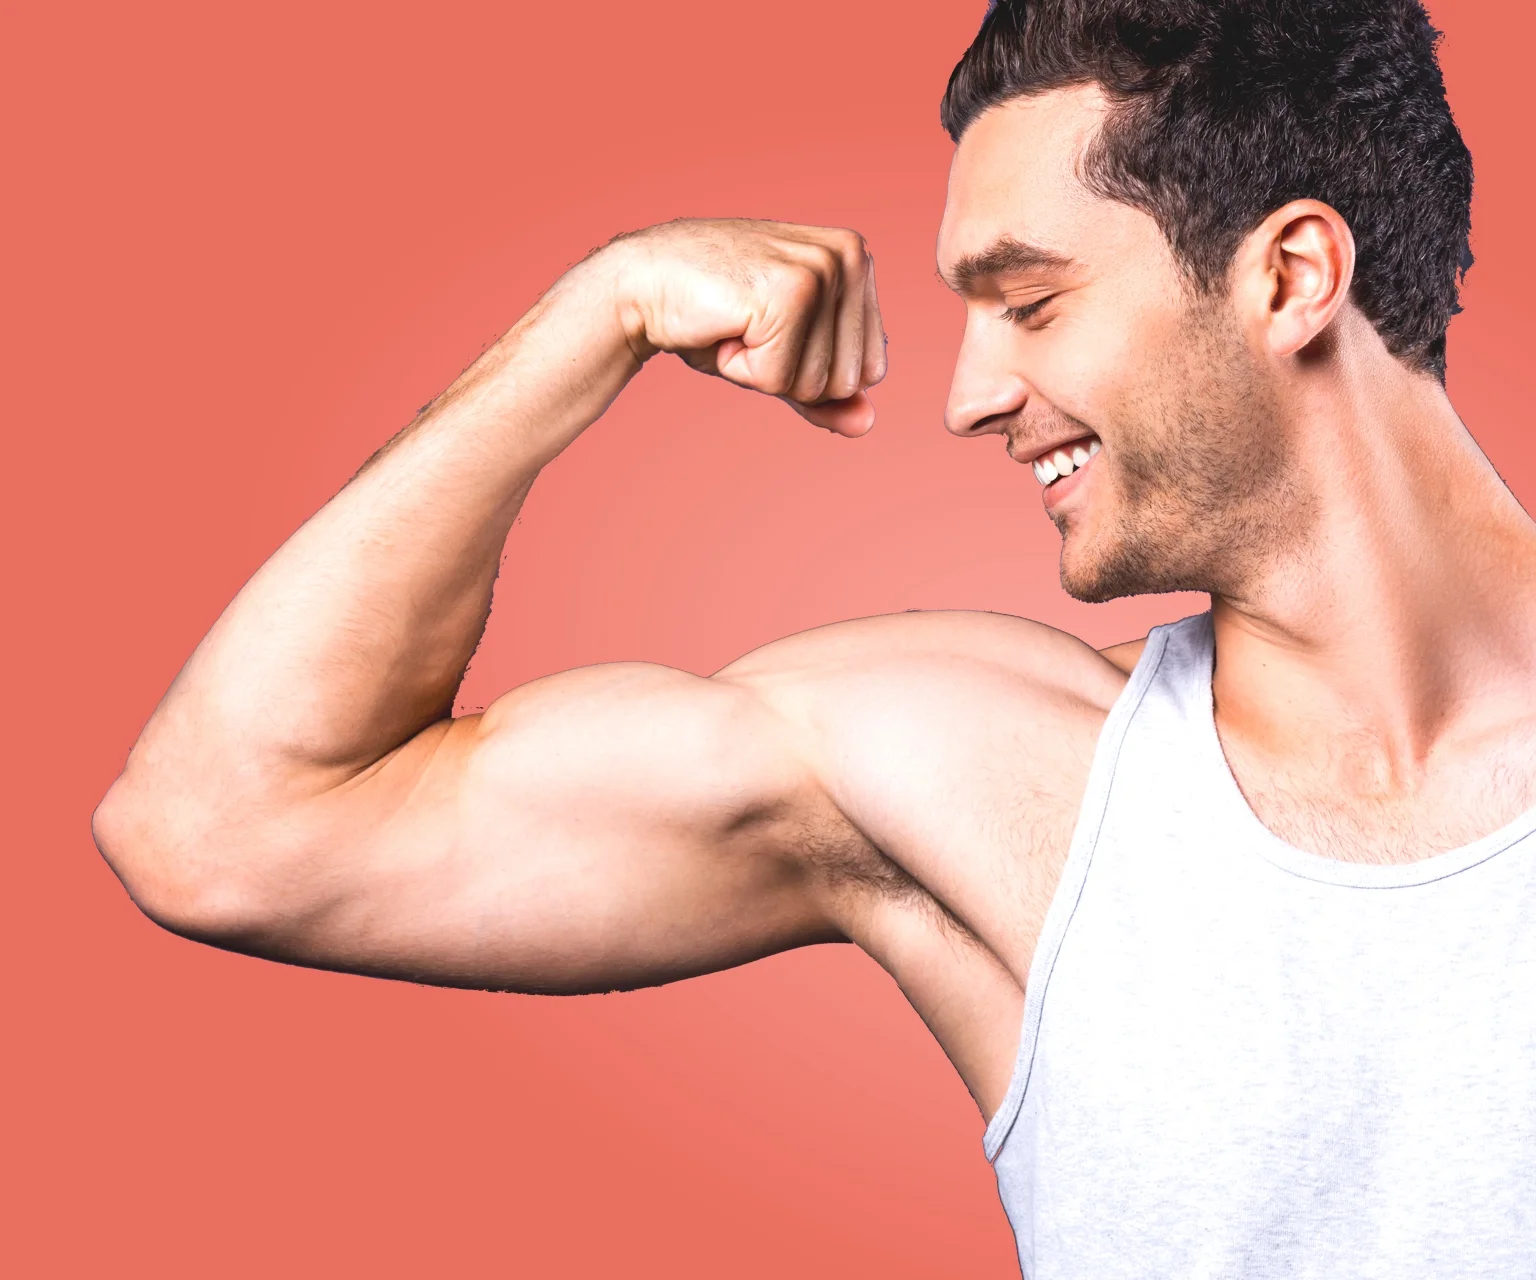 photo - Man flexes his arm muscles. Gym Geek AI can generate an arm day workout, as well as workouts for an body part or muscle group.